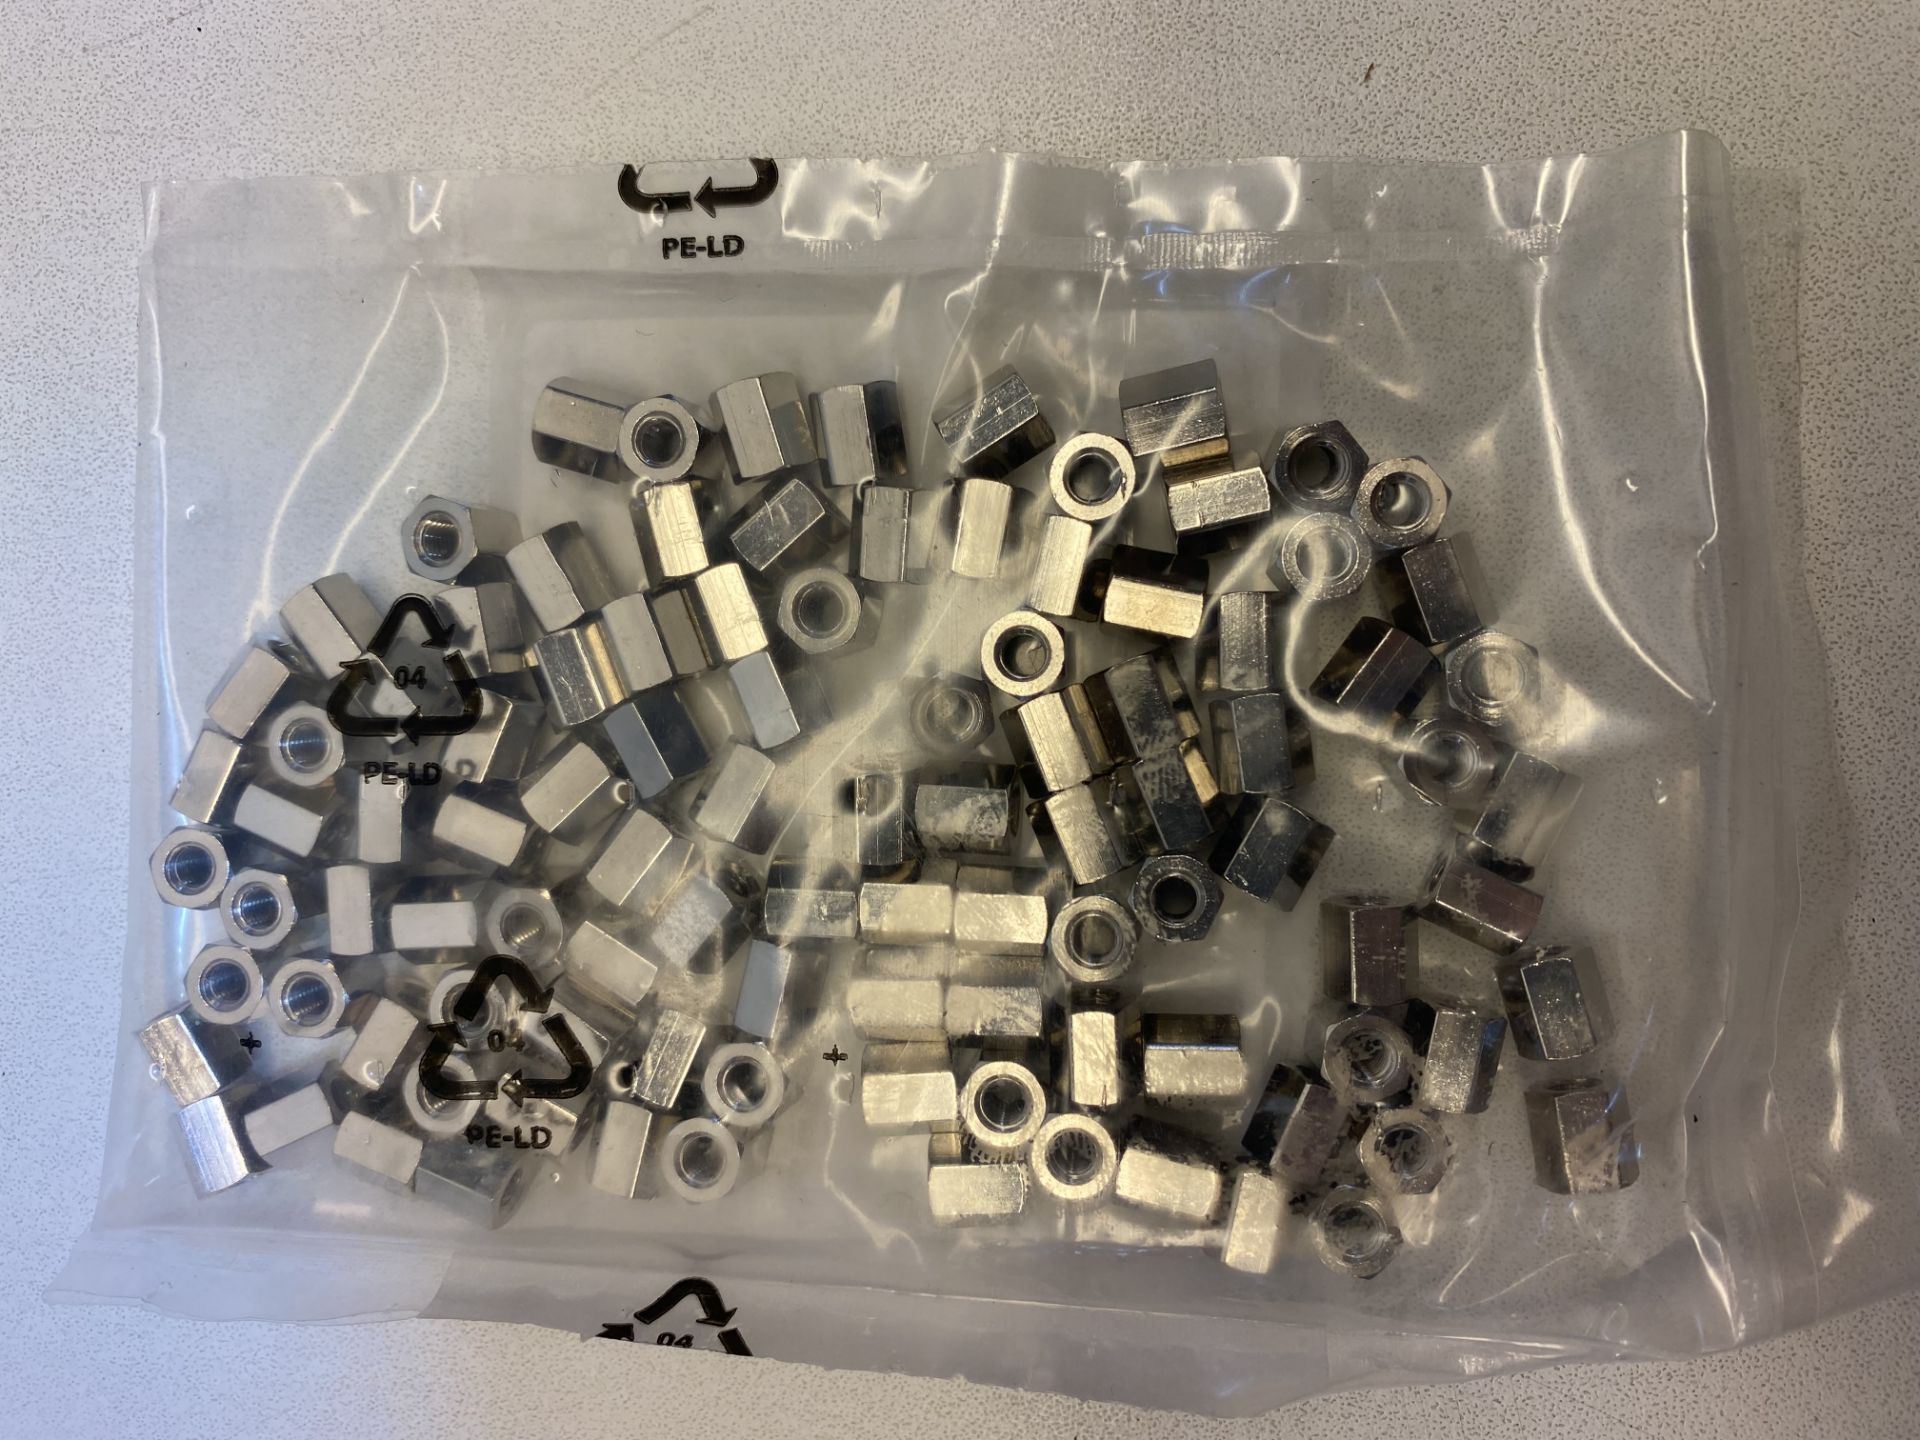 Approximately 14,000 x M4 Spacers